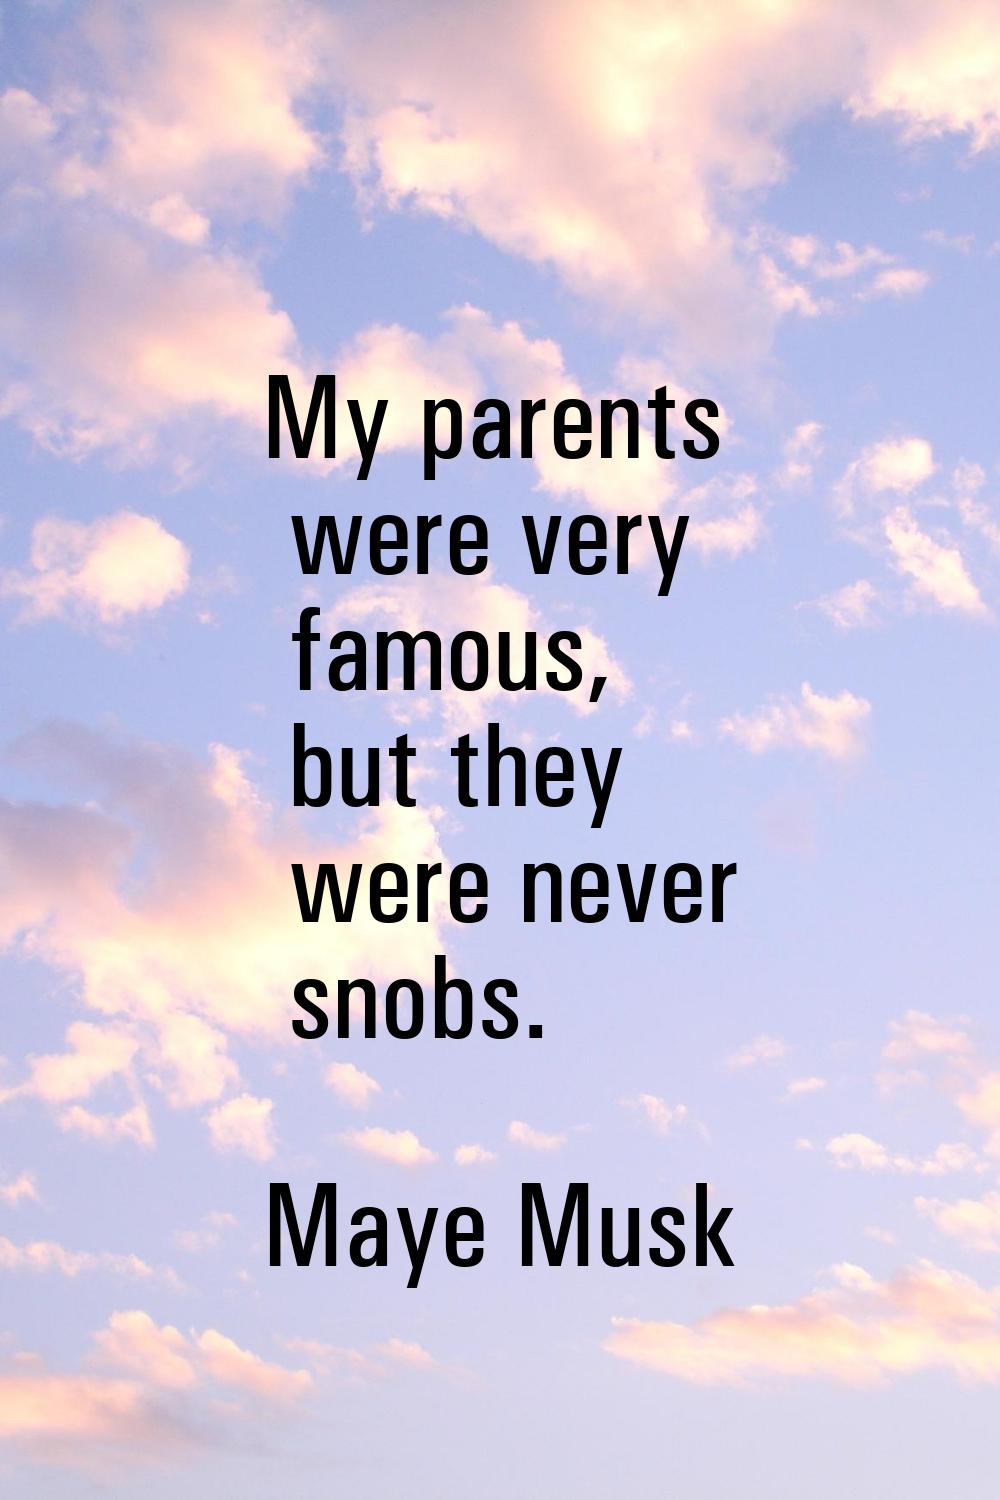 My parents were very famous, but they were never snobs.